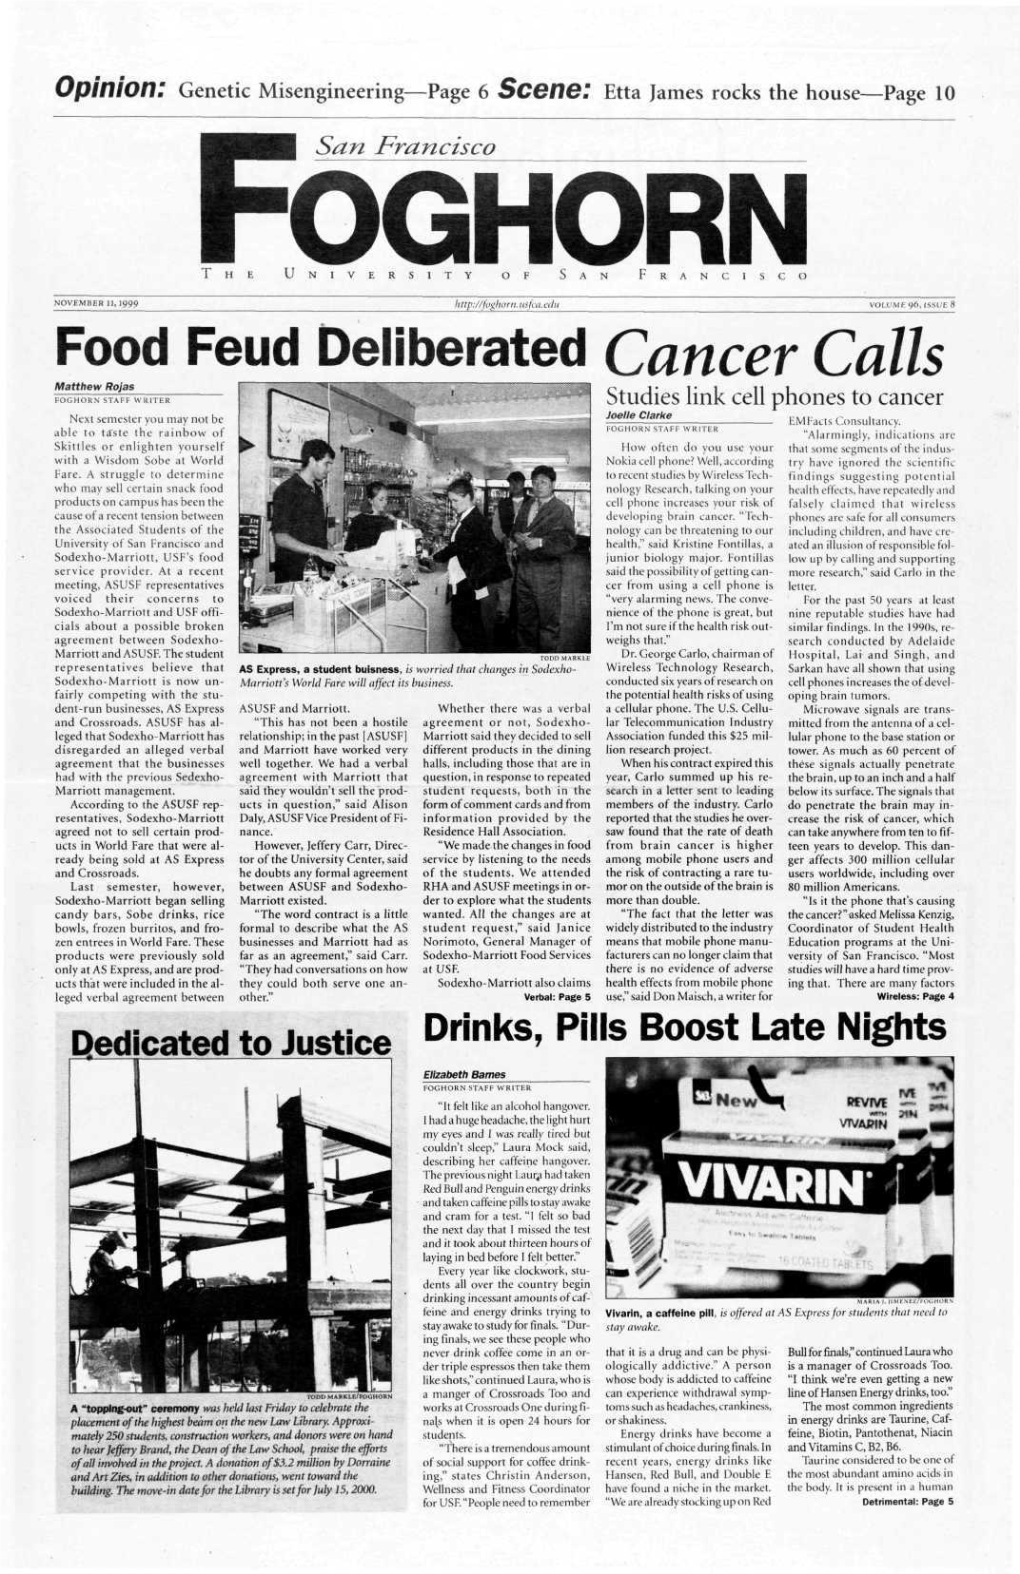 Food Feud Deliberated Cancer Calls